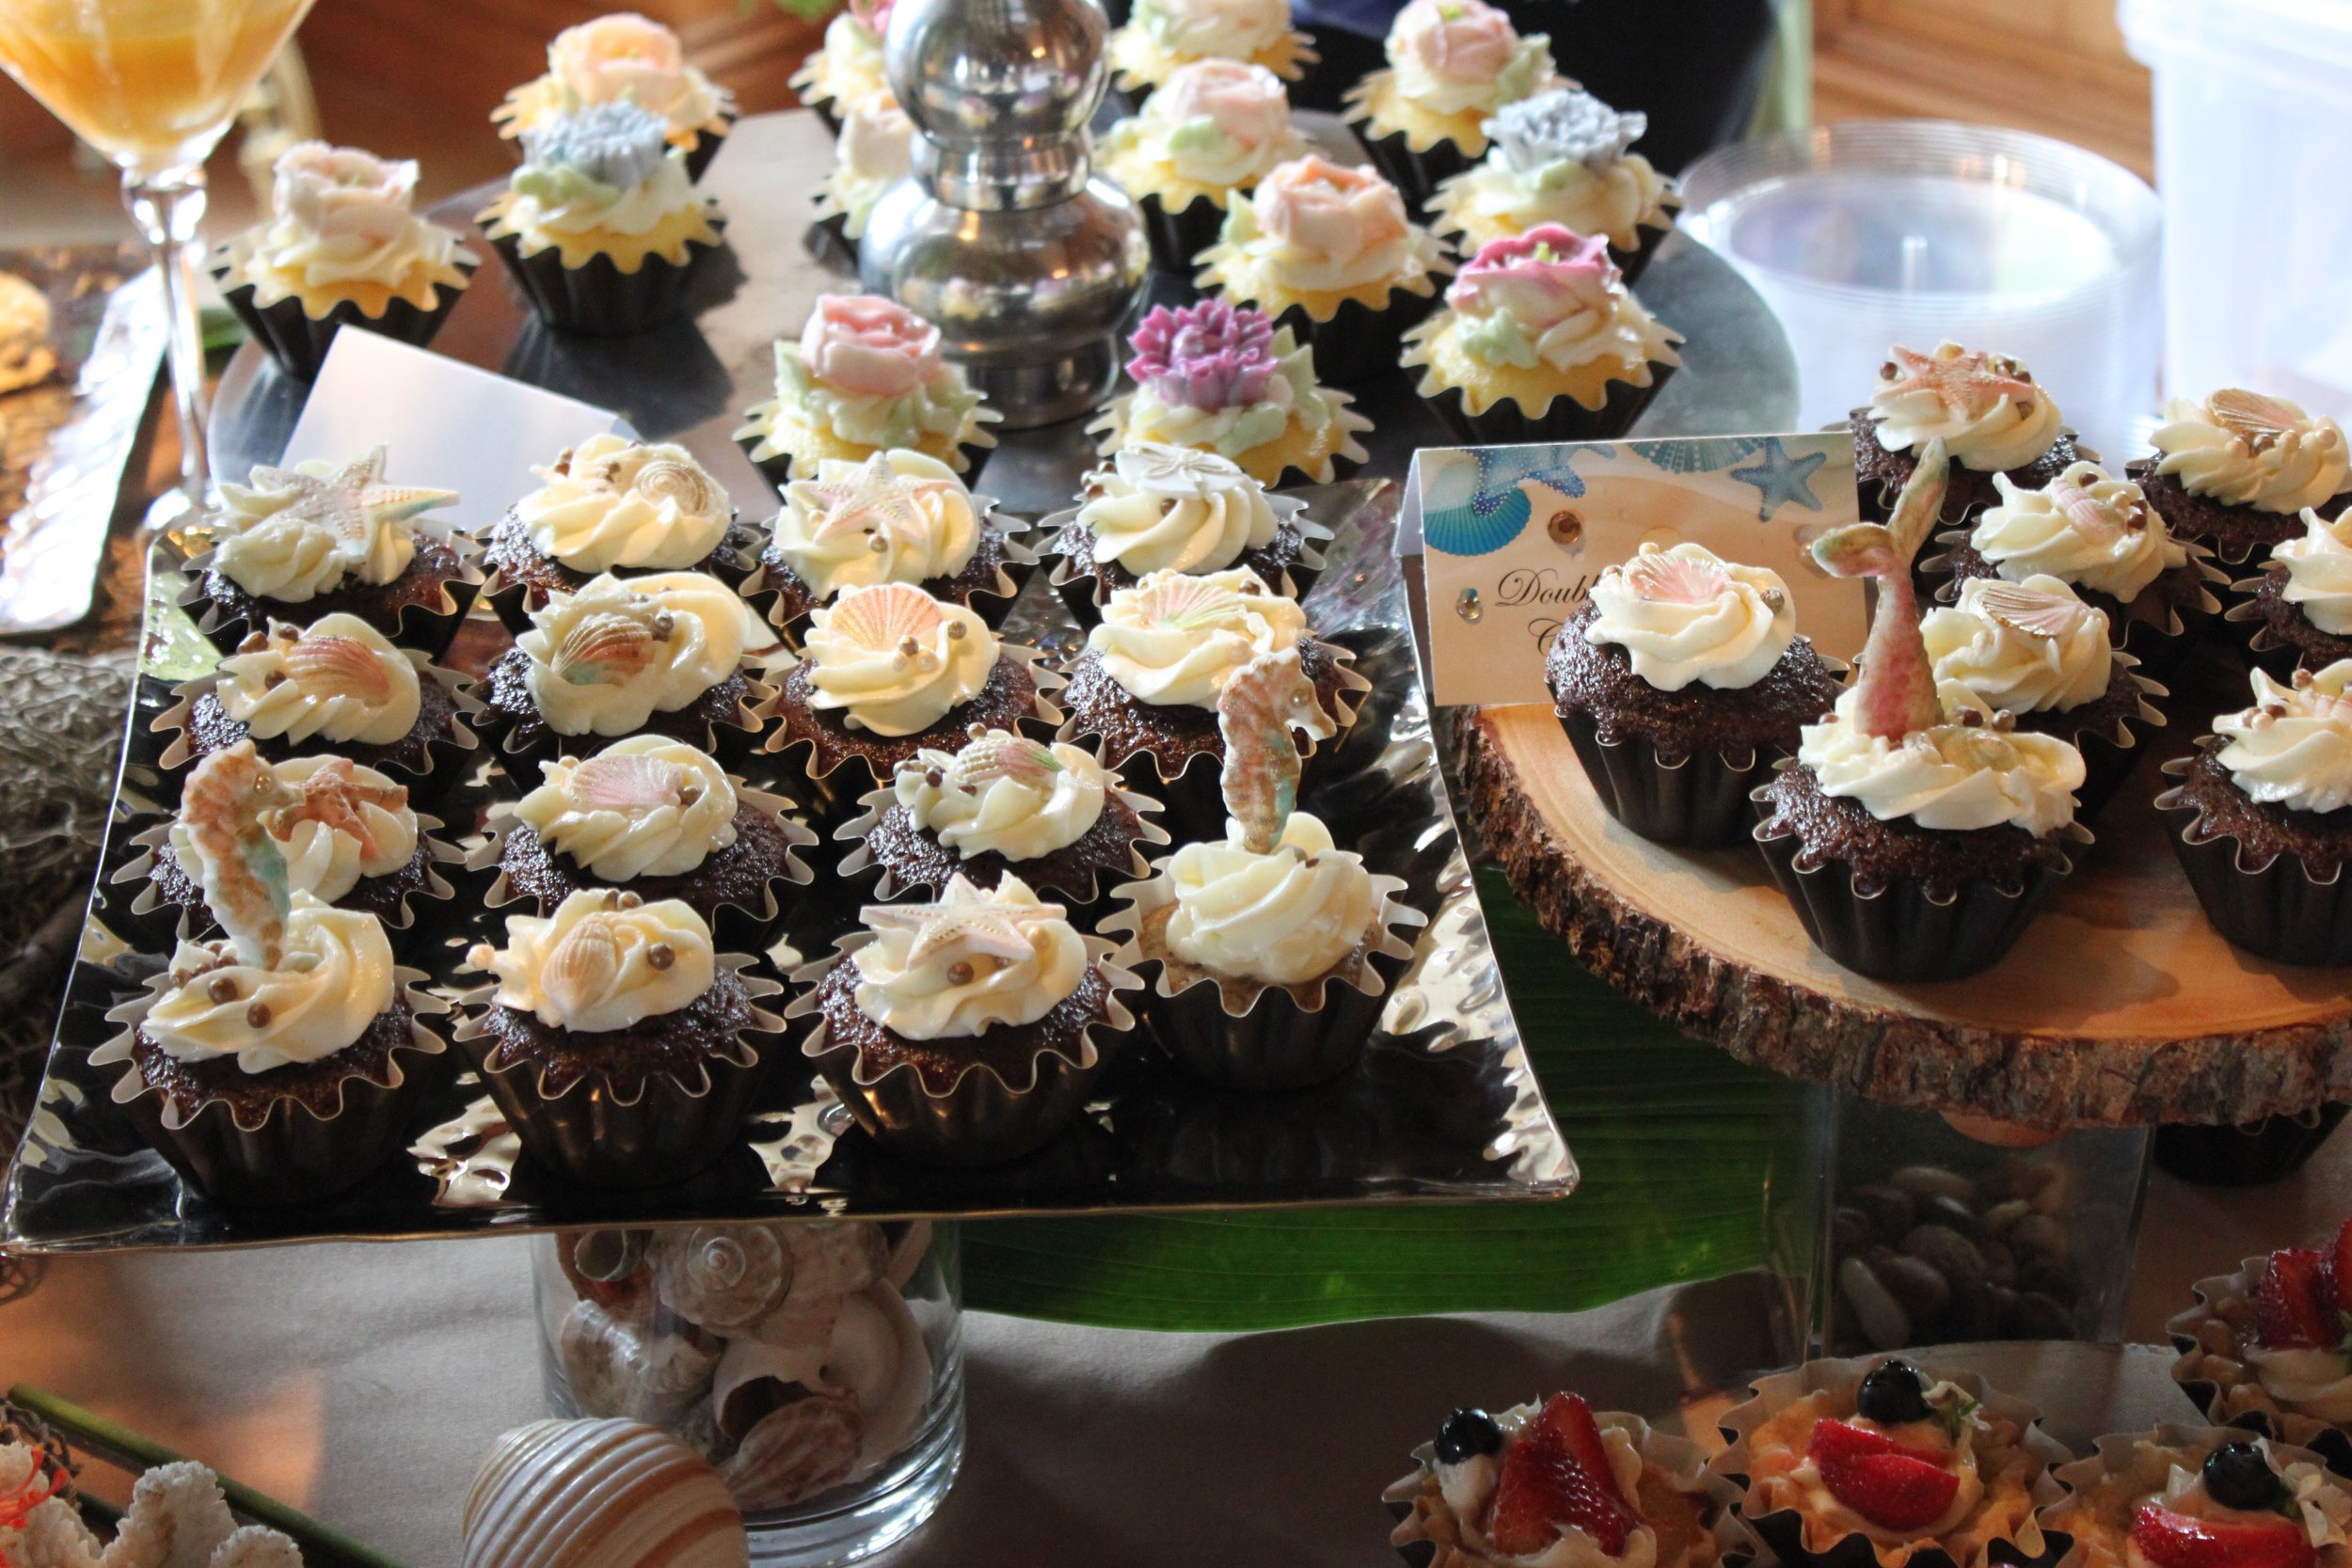 Cupcakes decorated with seahorses, mermaid tails and flowers rest on the table. 